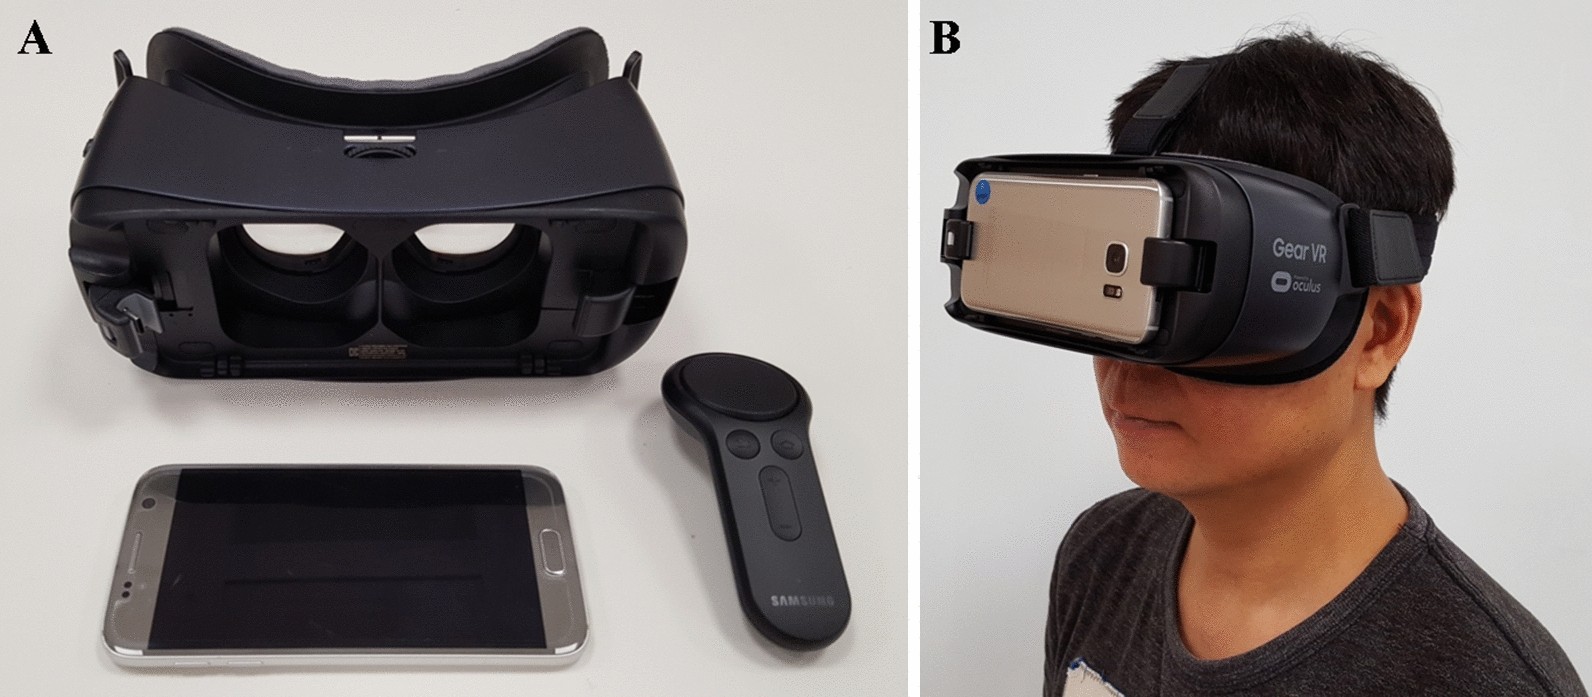 Clinical performance of a smartphone-based low vision aid | Scientific  Reports